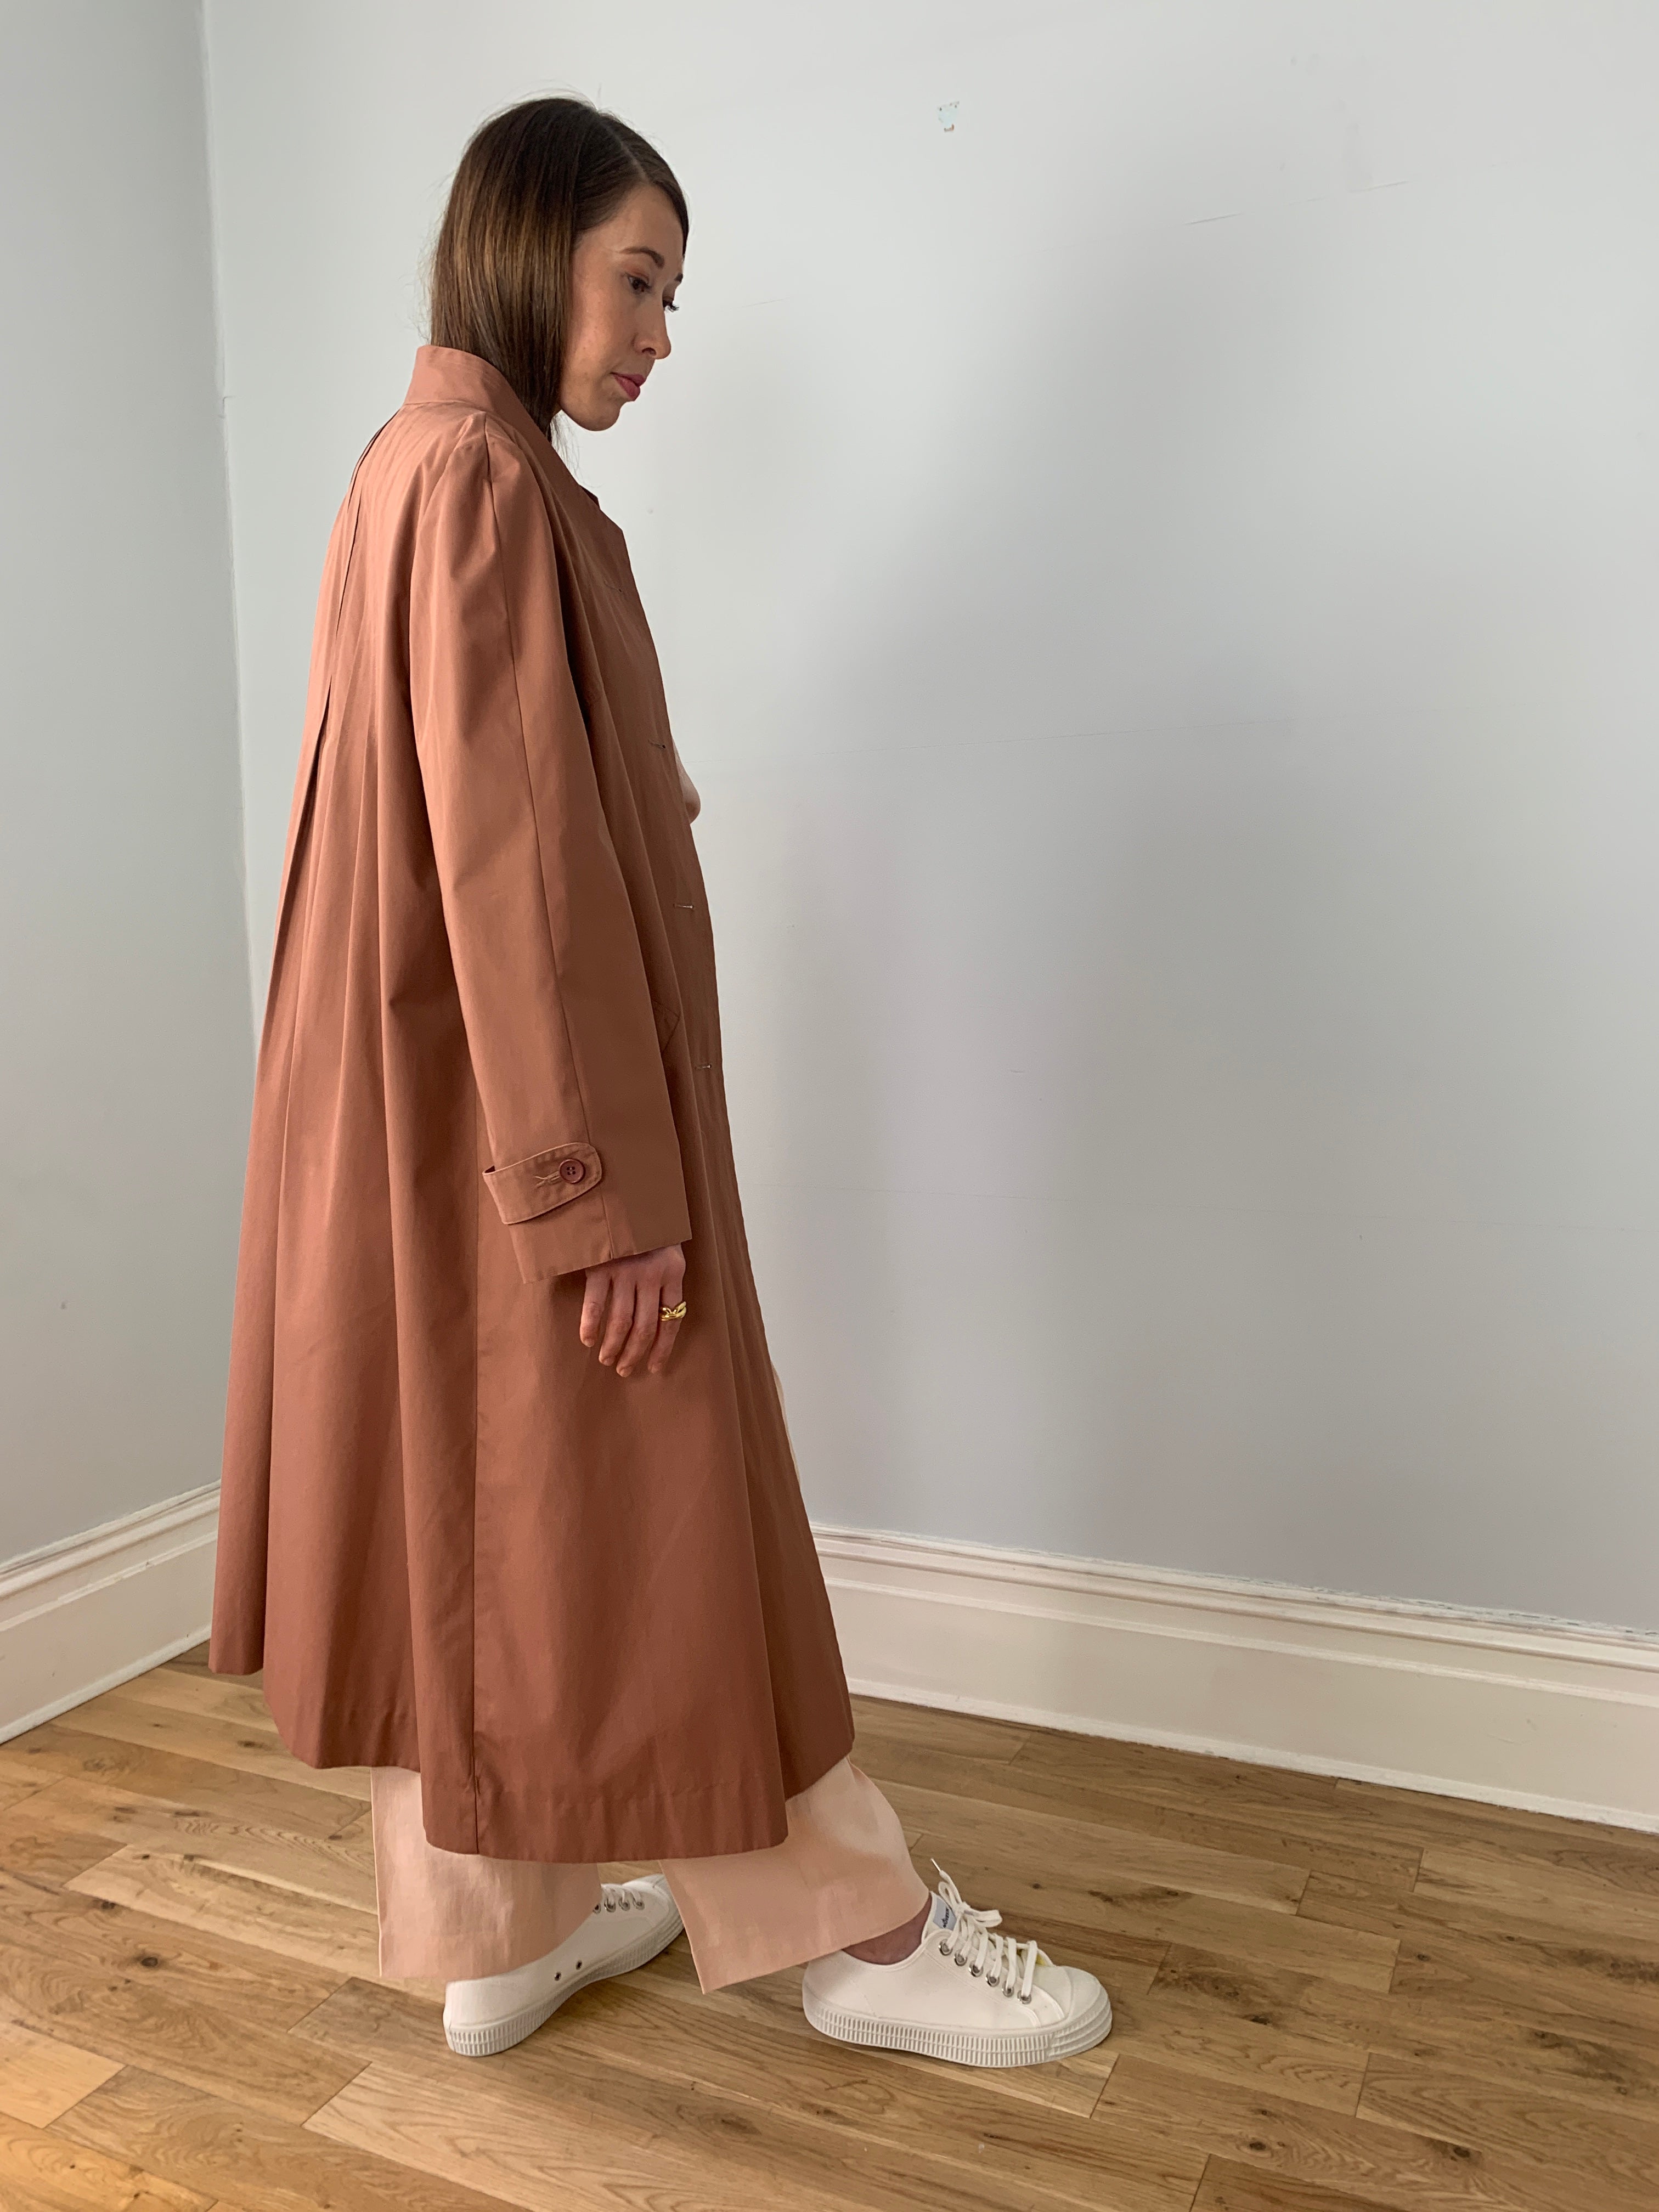 Beautiful vintage Nino swing trench coat with pleat back